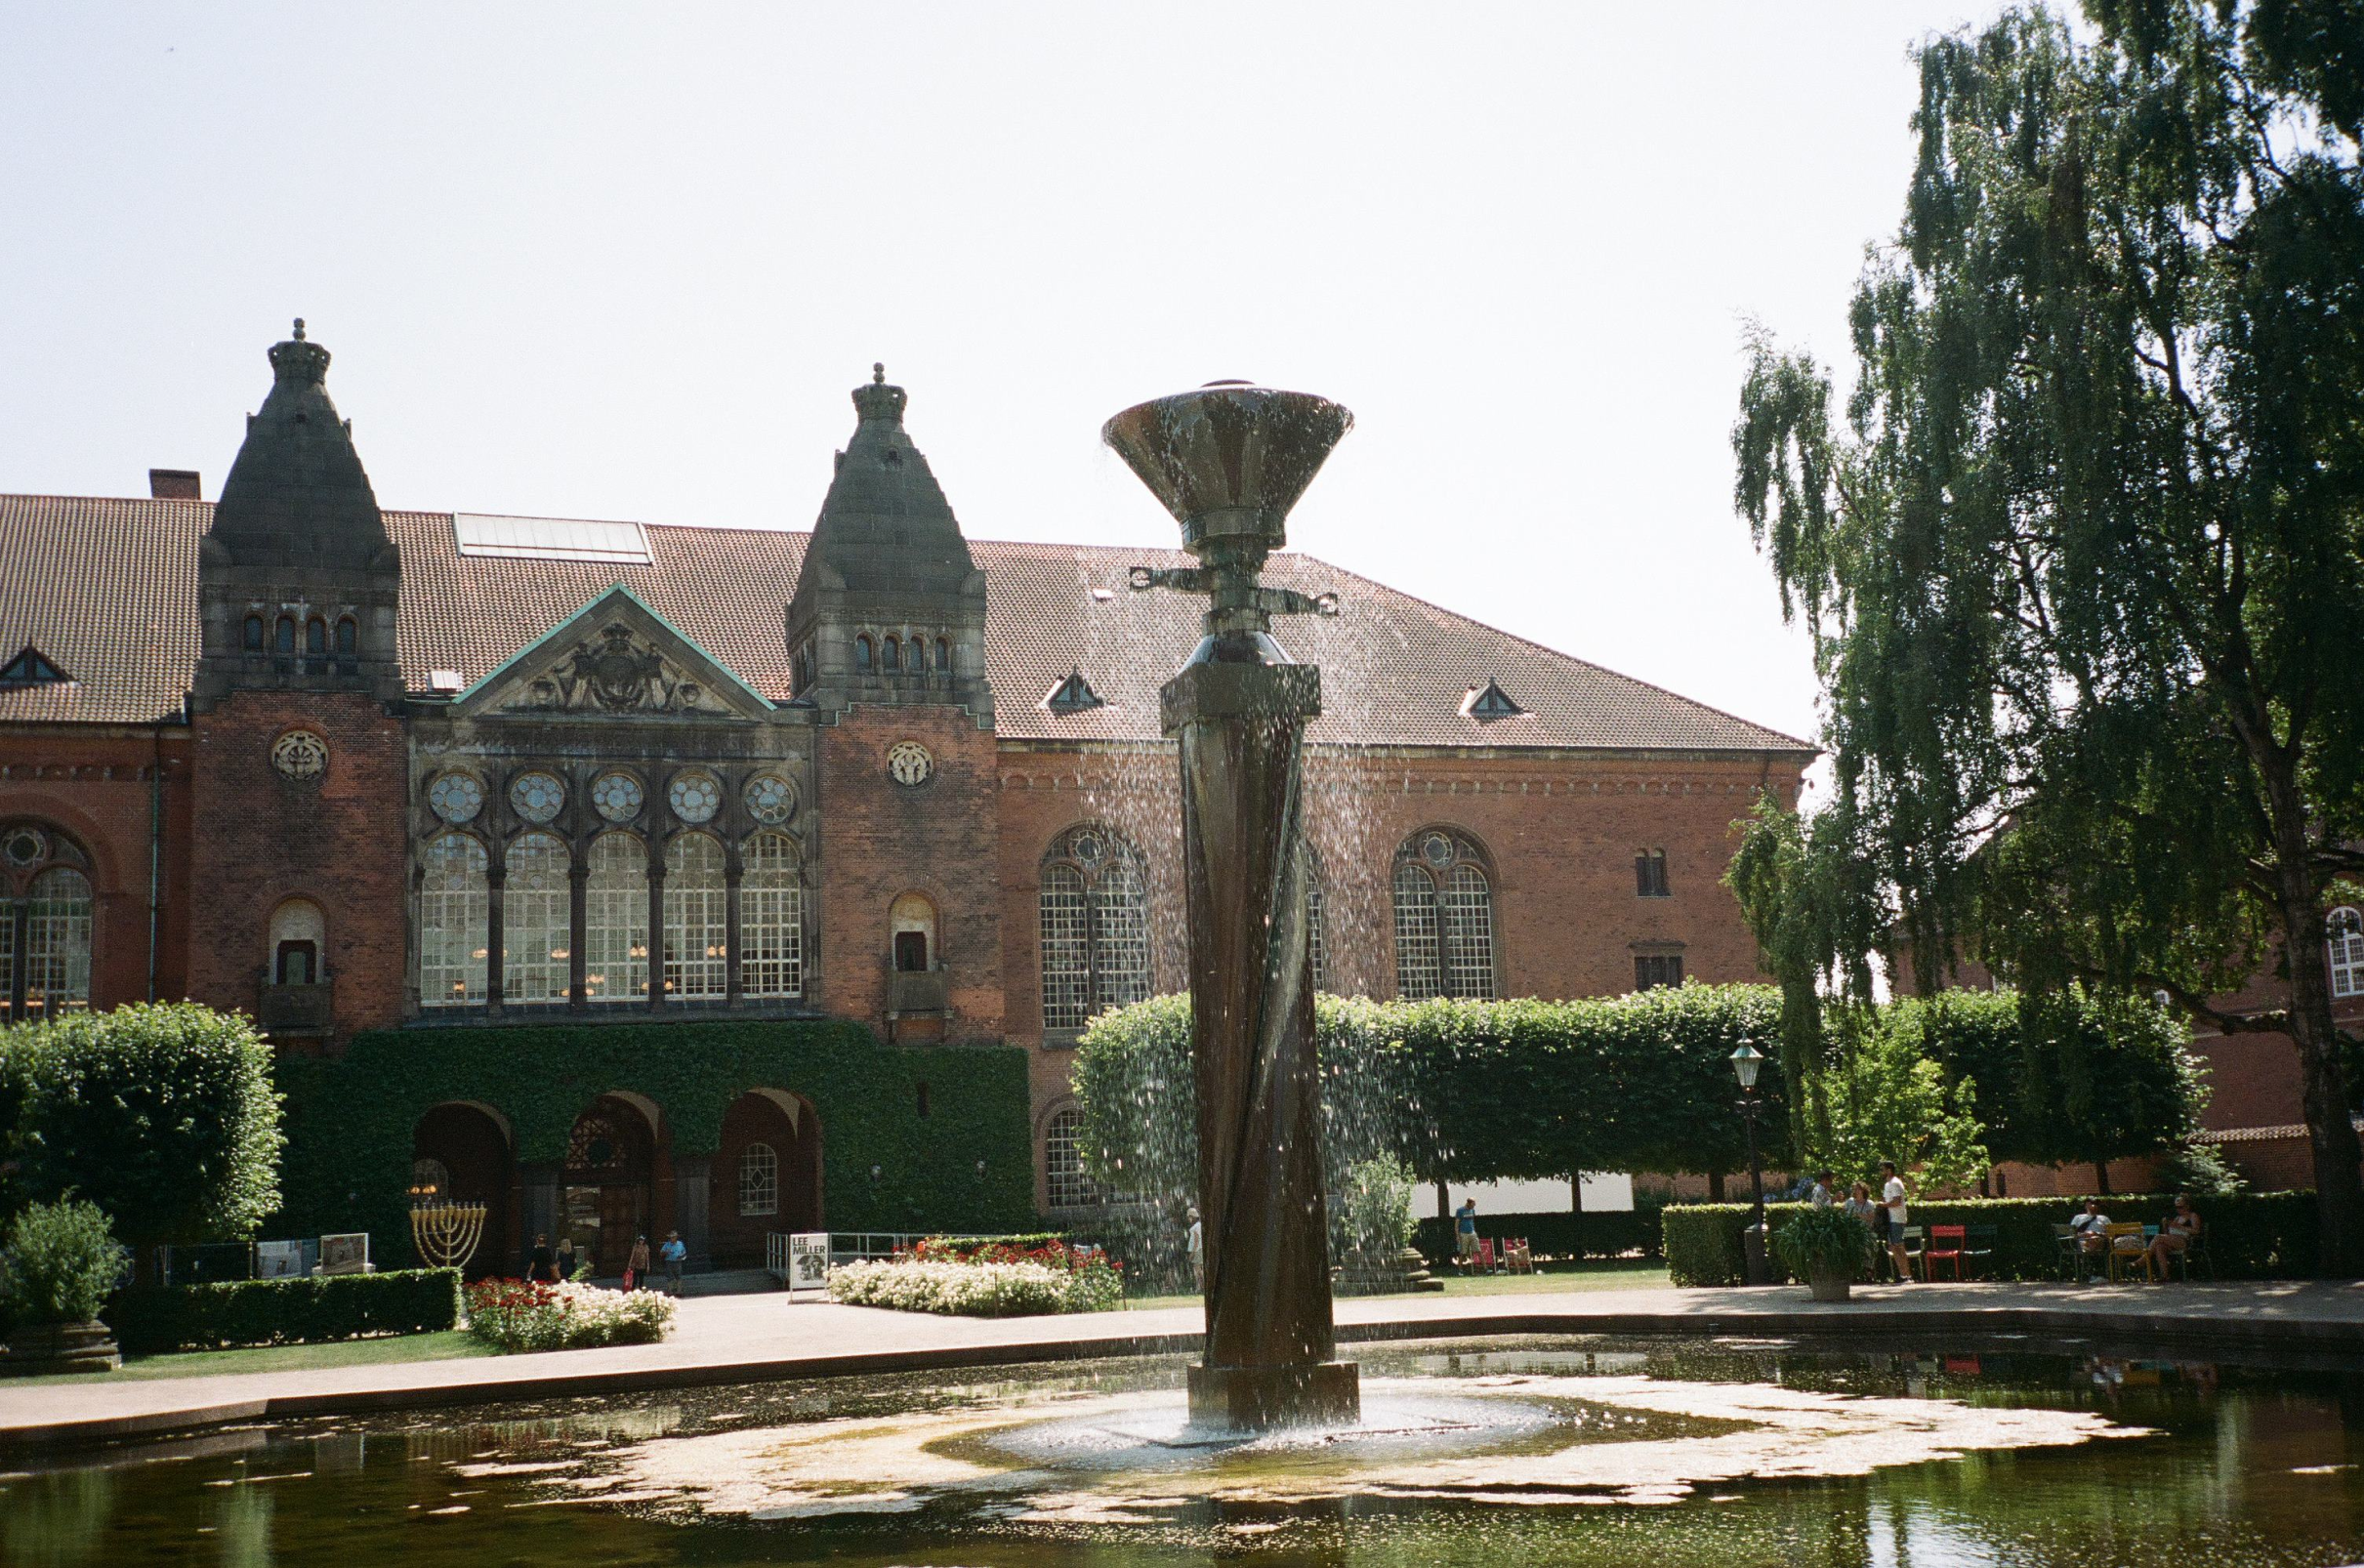 The water sculpture is an eight-meter-high column fountain with fish swimming below in the pond.